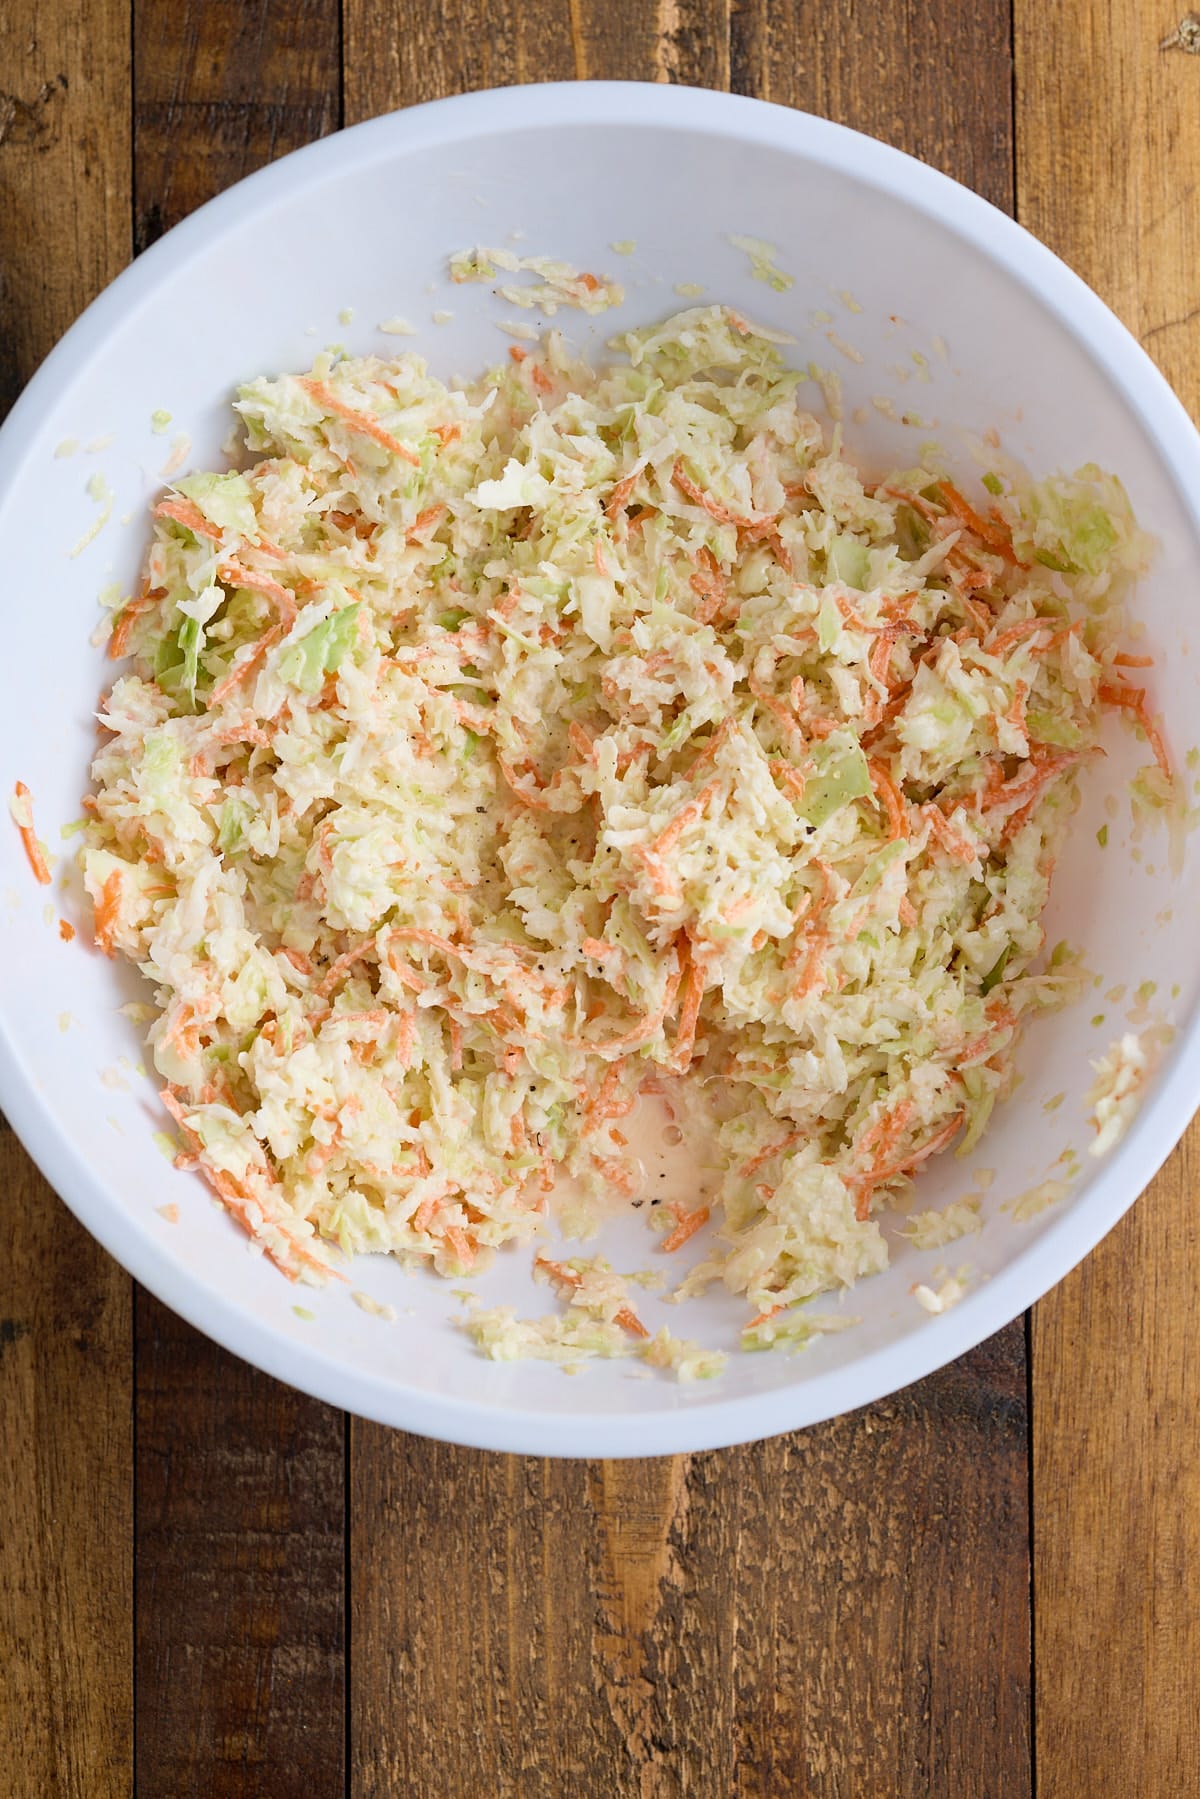 Coleslaw recipe mixed up in a mixing bowl.